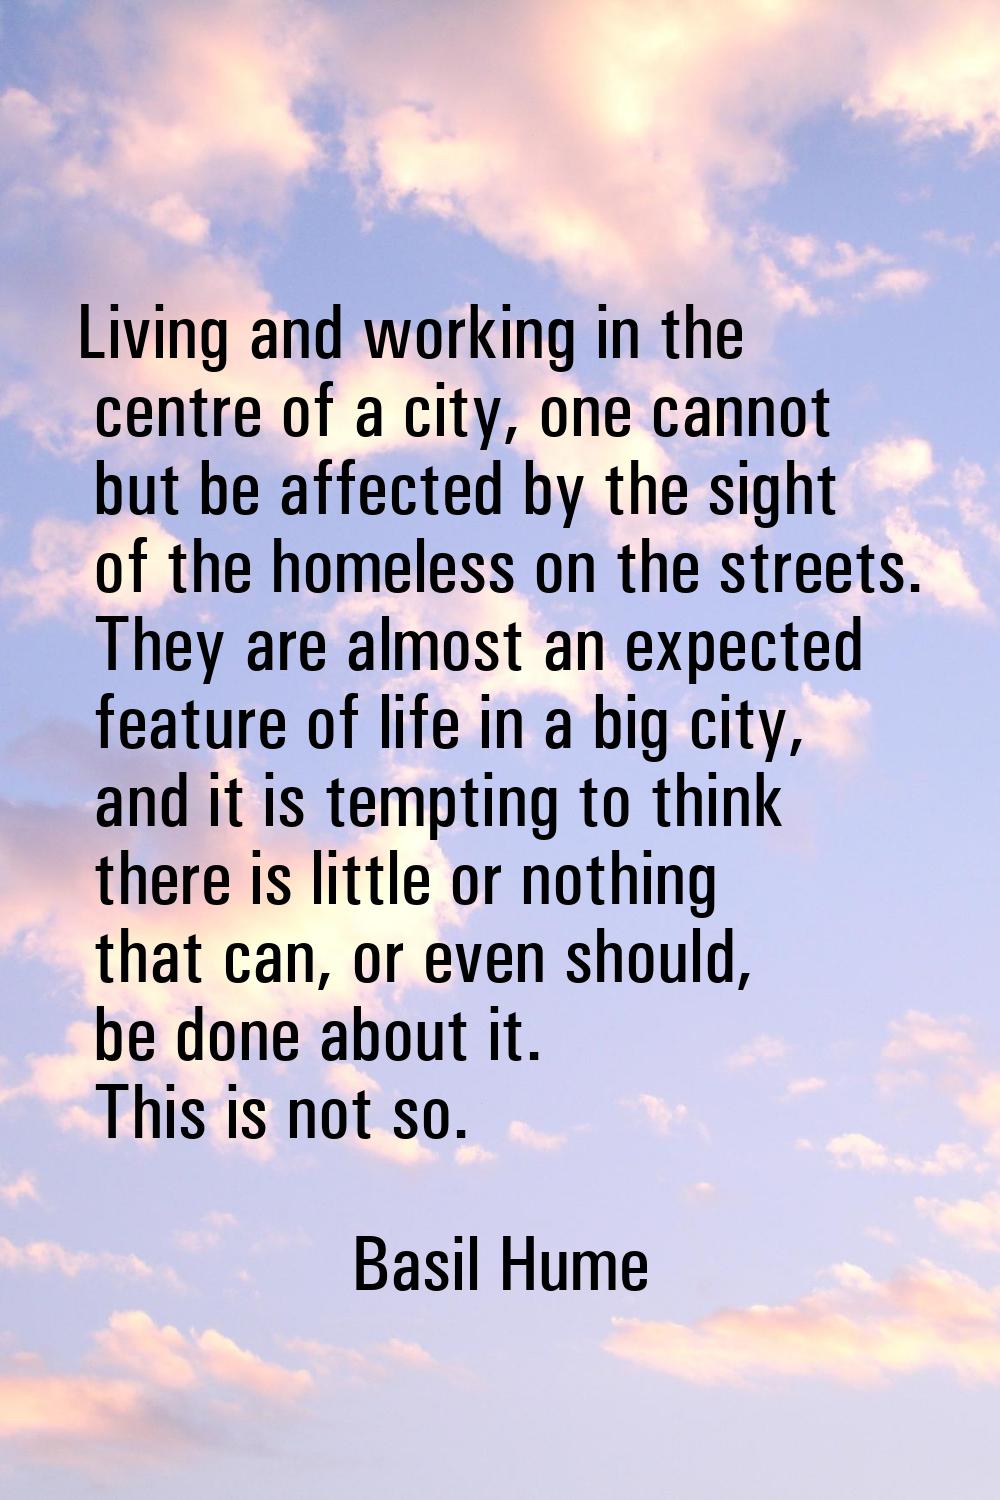 Living and working in the centre of a city, one cannot but be affected by the sight of the homeless